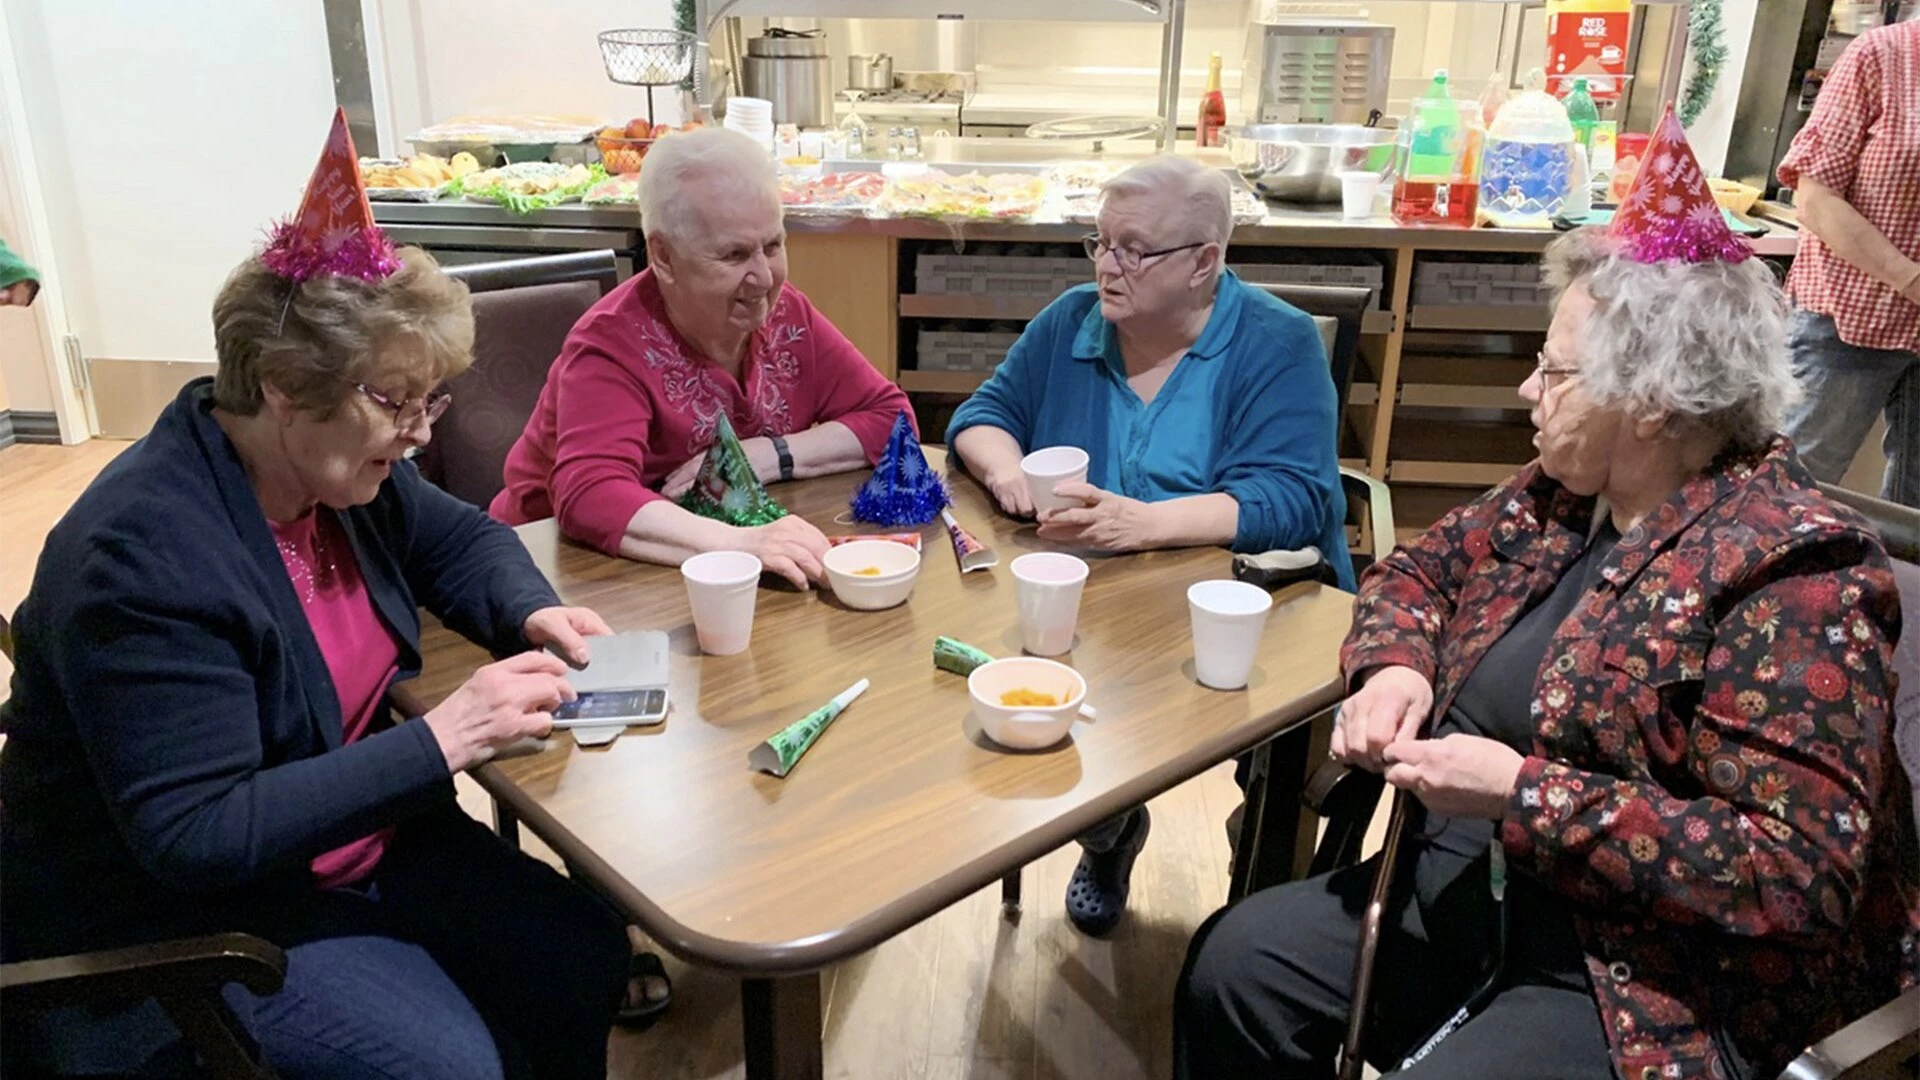 Residents of GS enjoying birthday party at dining area